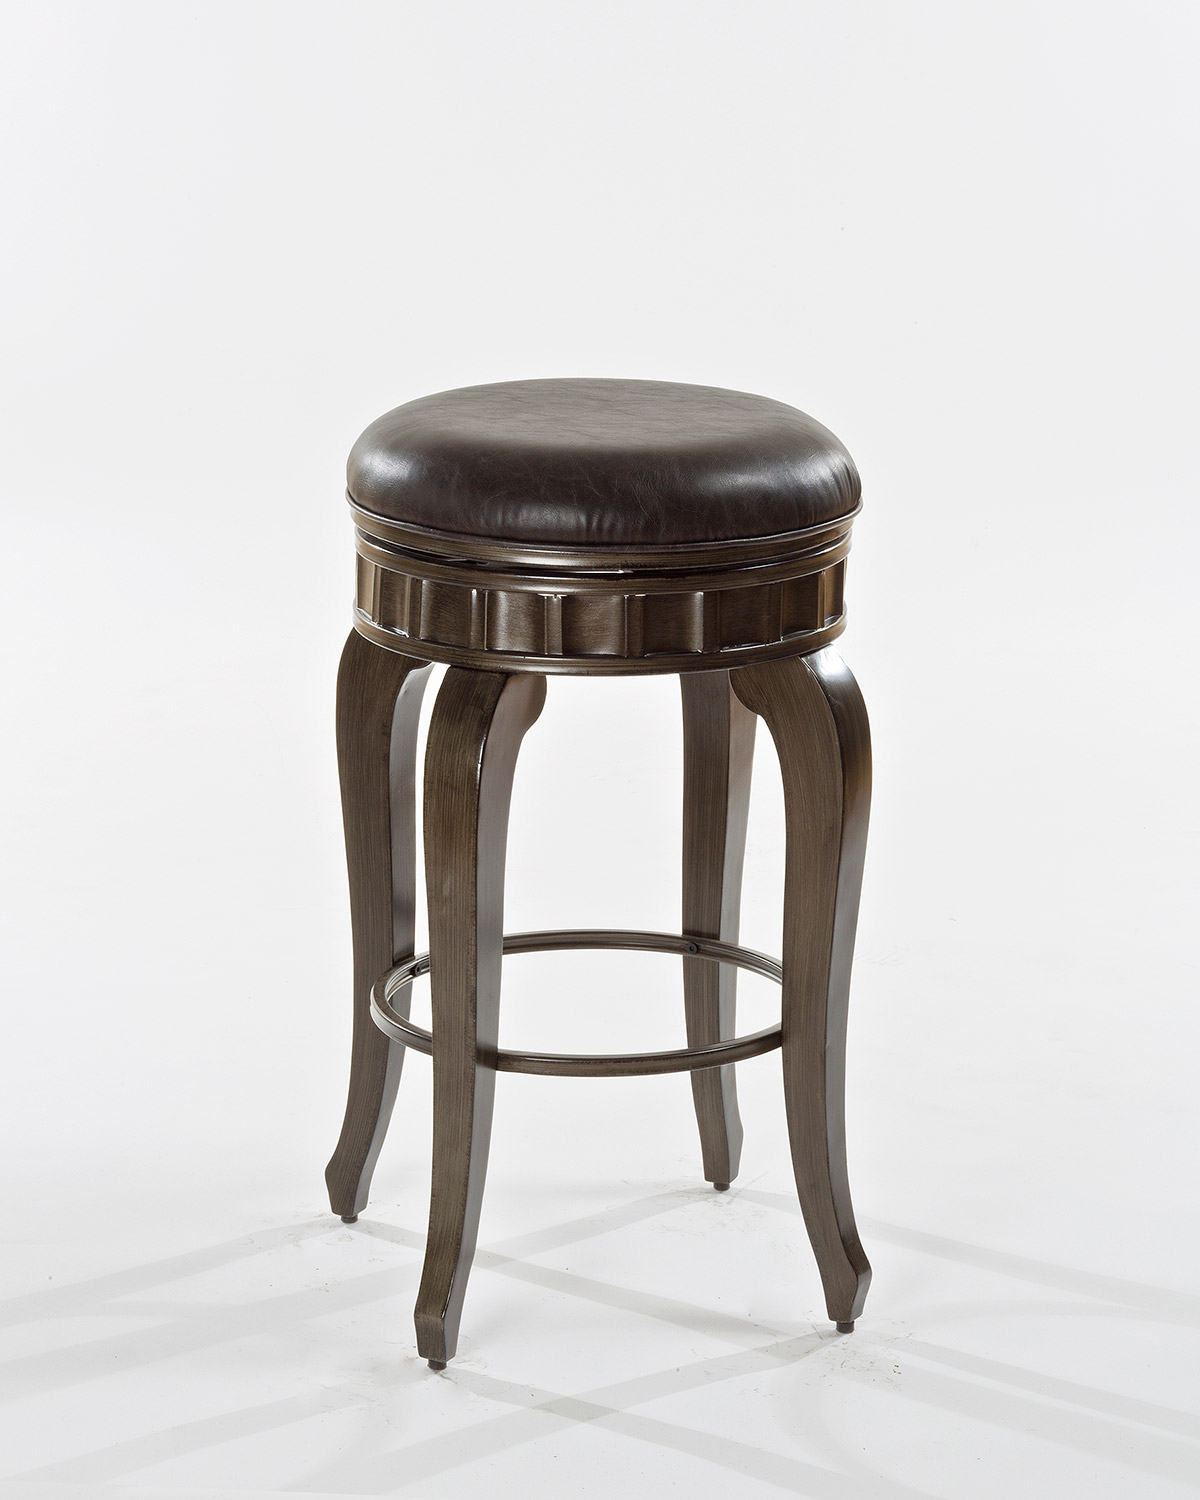 Hillsdale Devon Backless Swivel Counter Stool - Antique Brushed Pewter - Charcoal Faux Leather